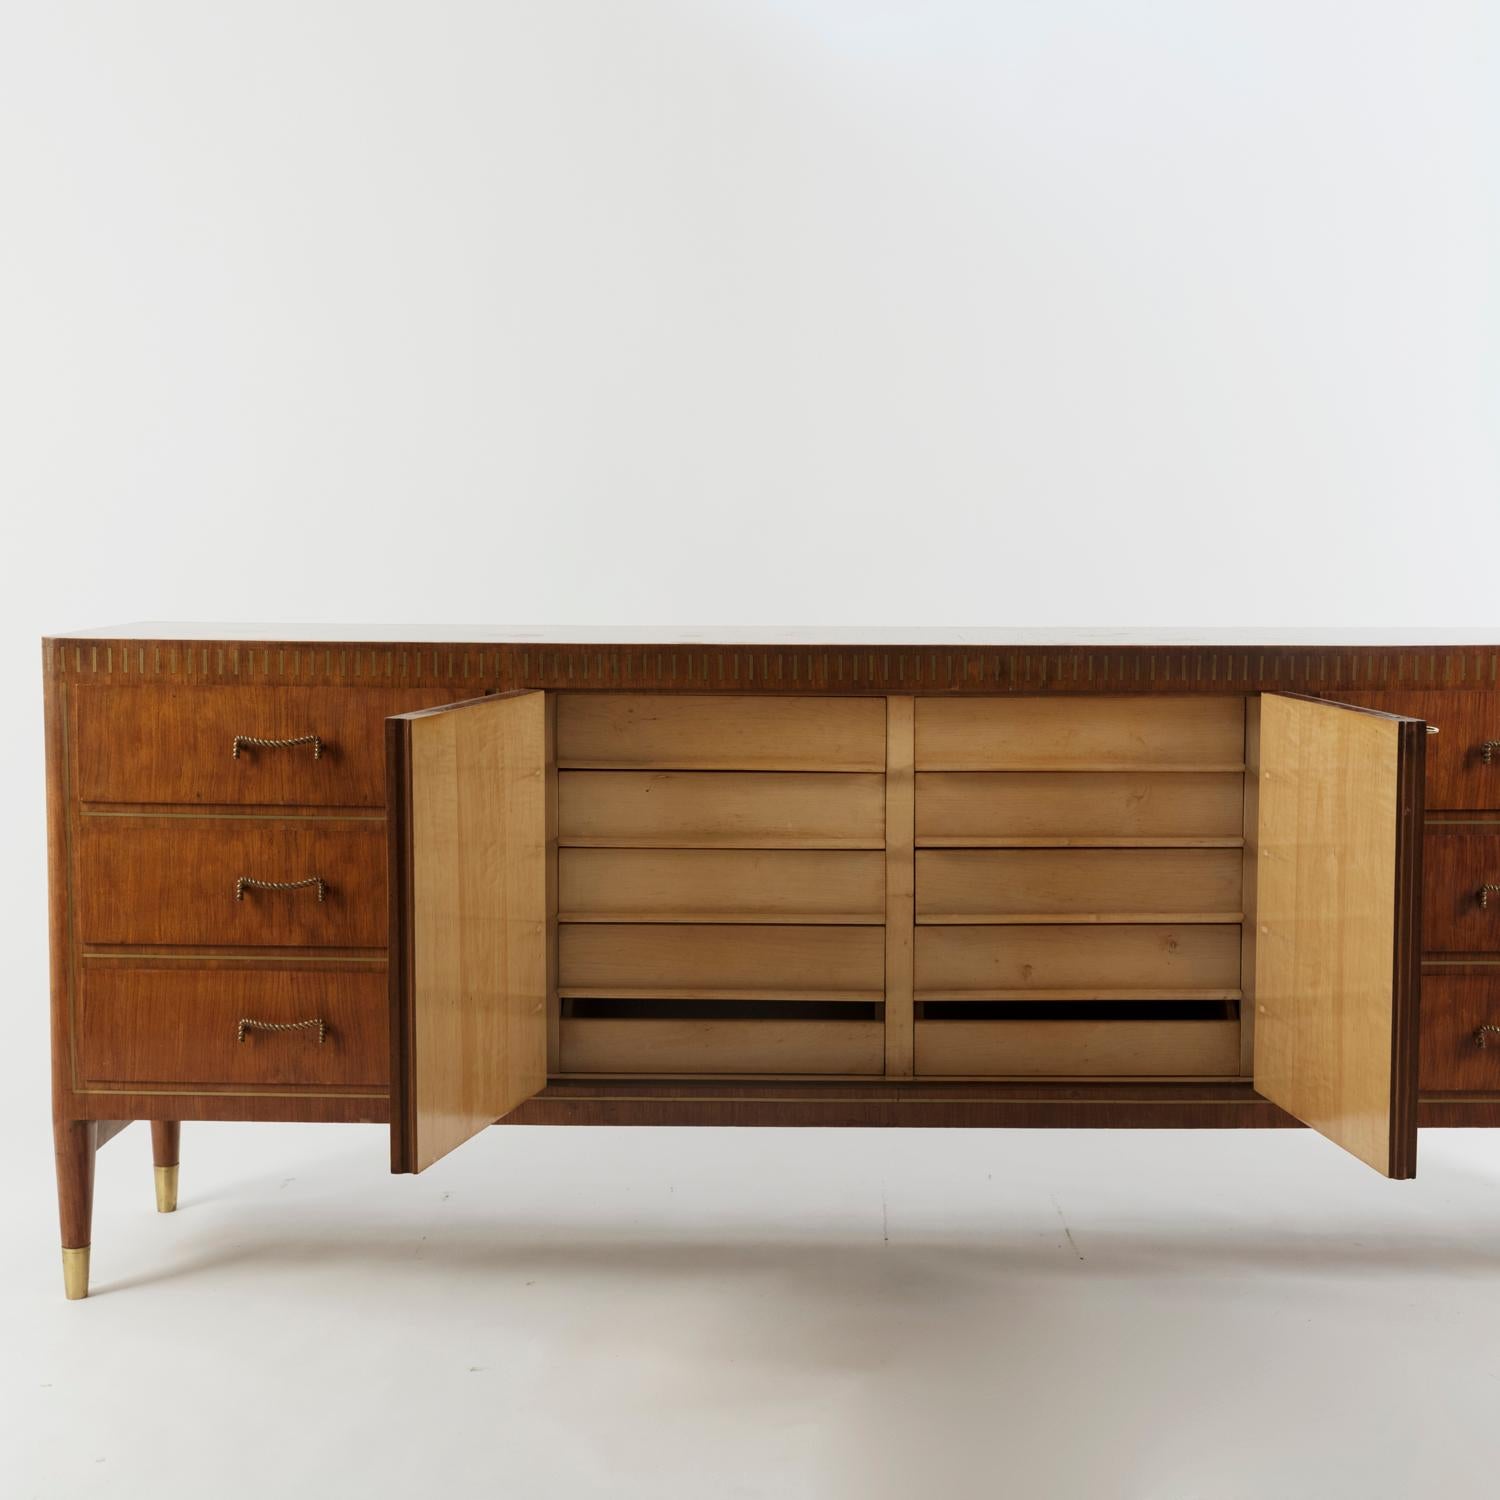 1950 inlaid Giovanni Gariboldi custom sideboard manufactured in Turin by Colli. This museum piece was made for a private commission and has the iconic Gariboldi distinctive inlay work on the front, superior construction quality, sycamore internal